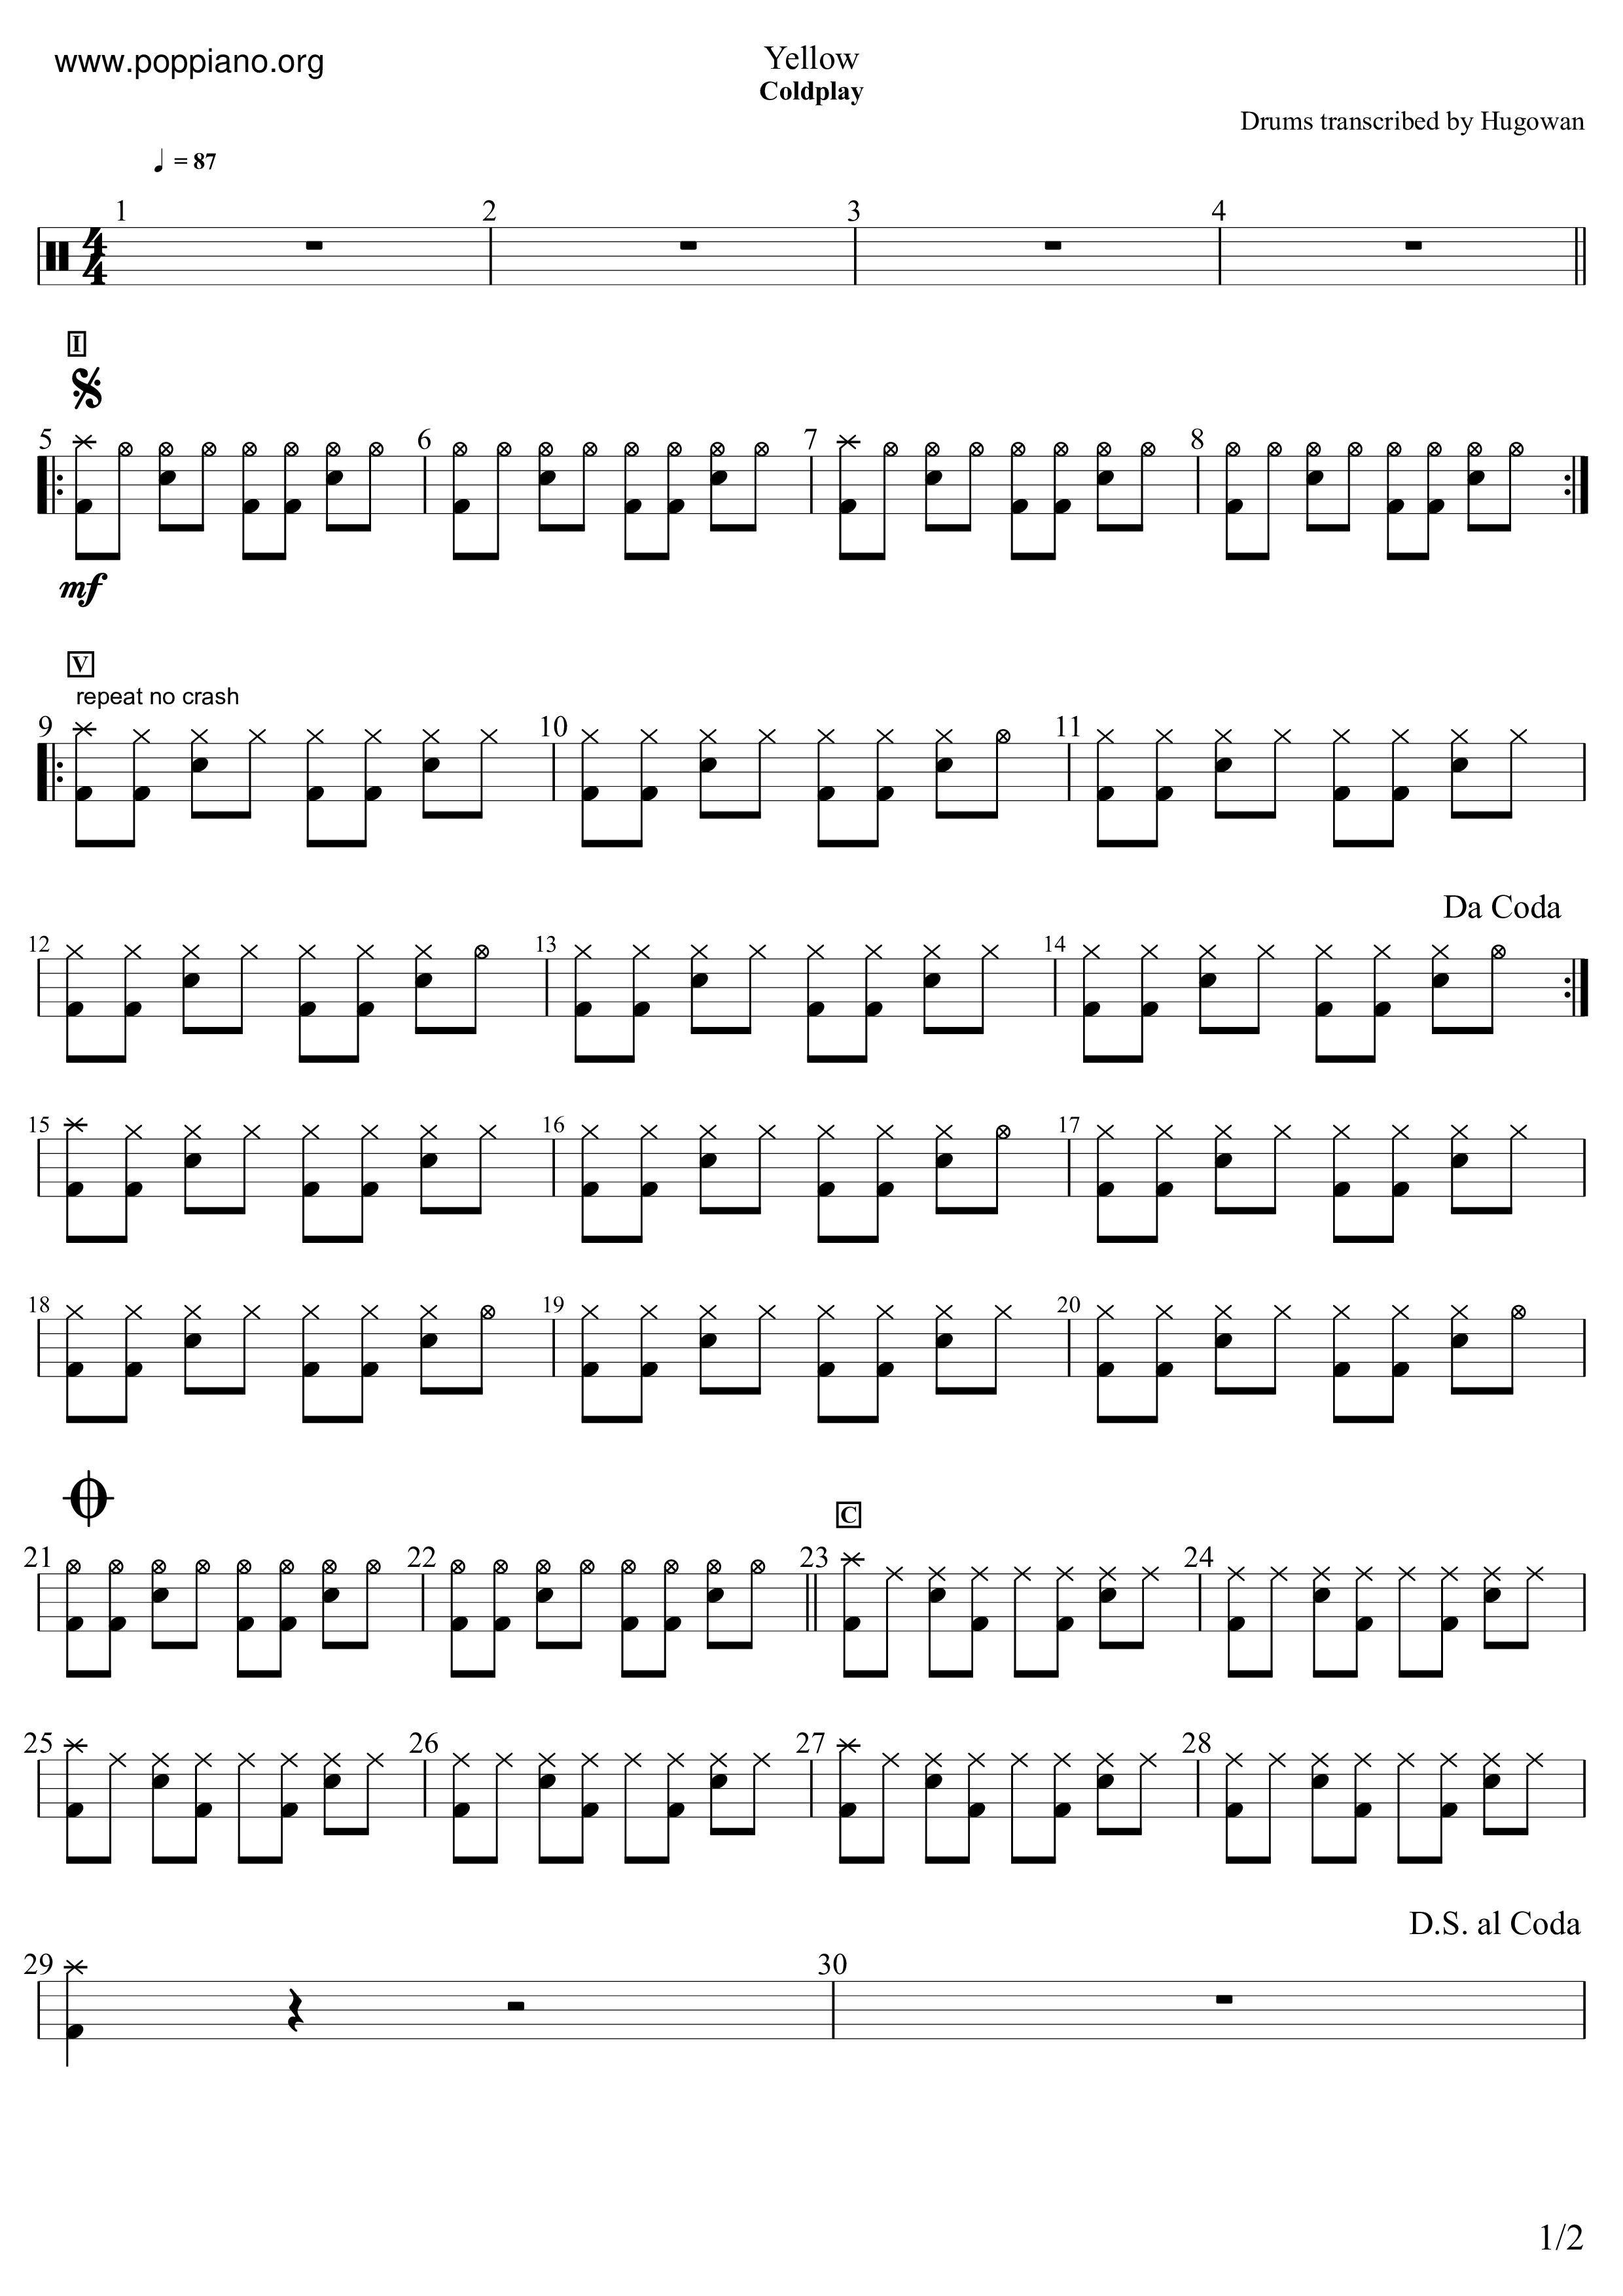 guitar chords yellow coldplay